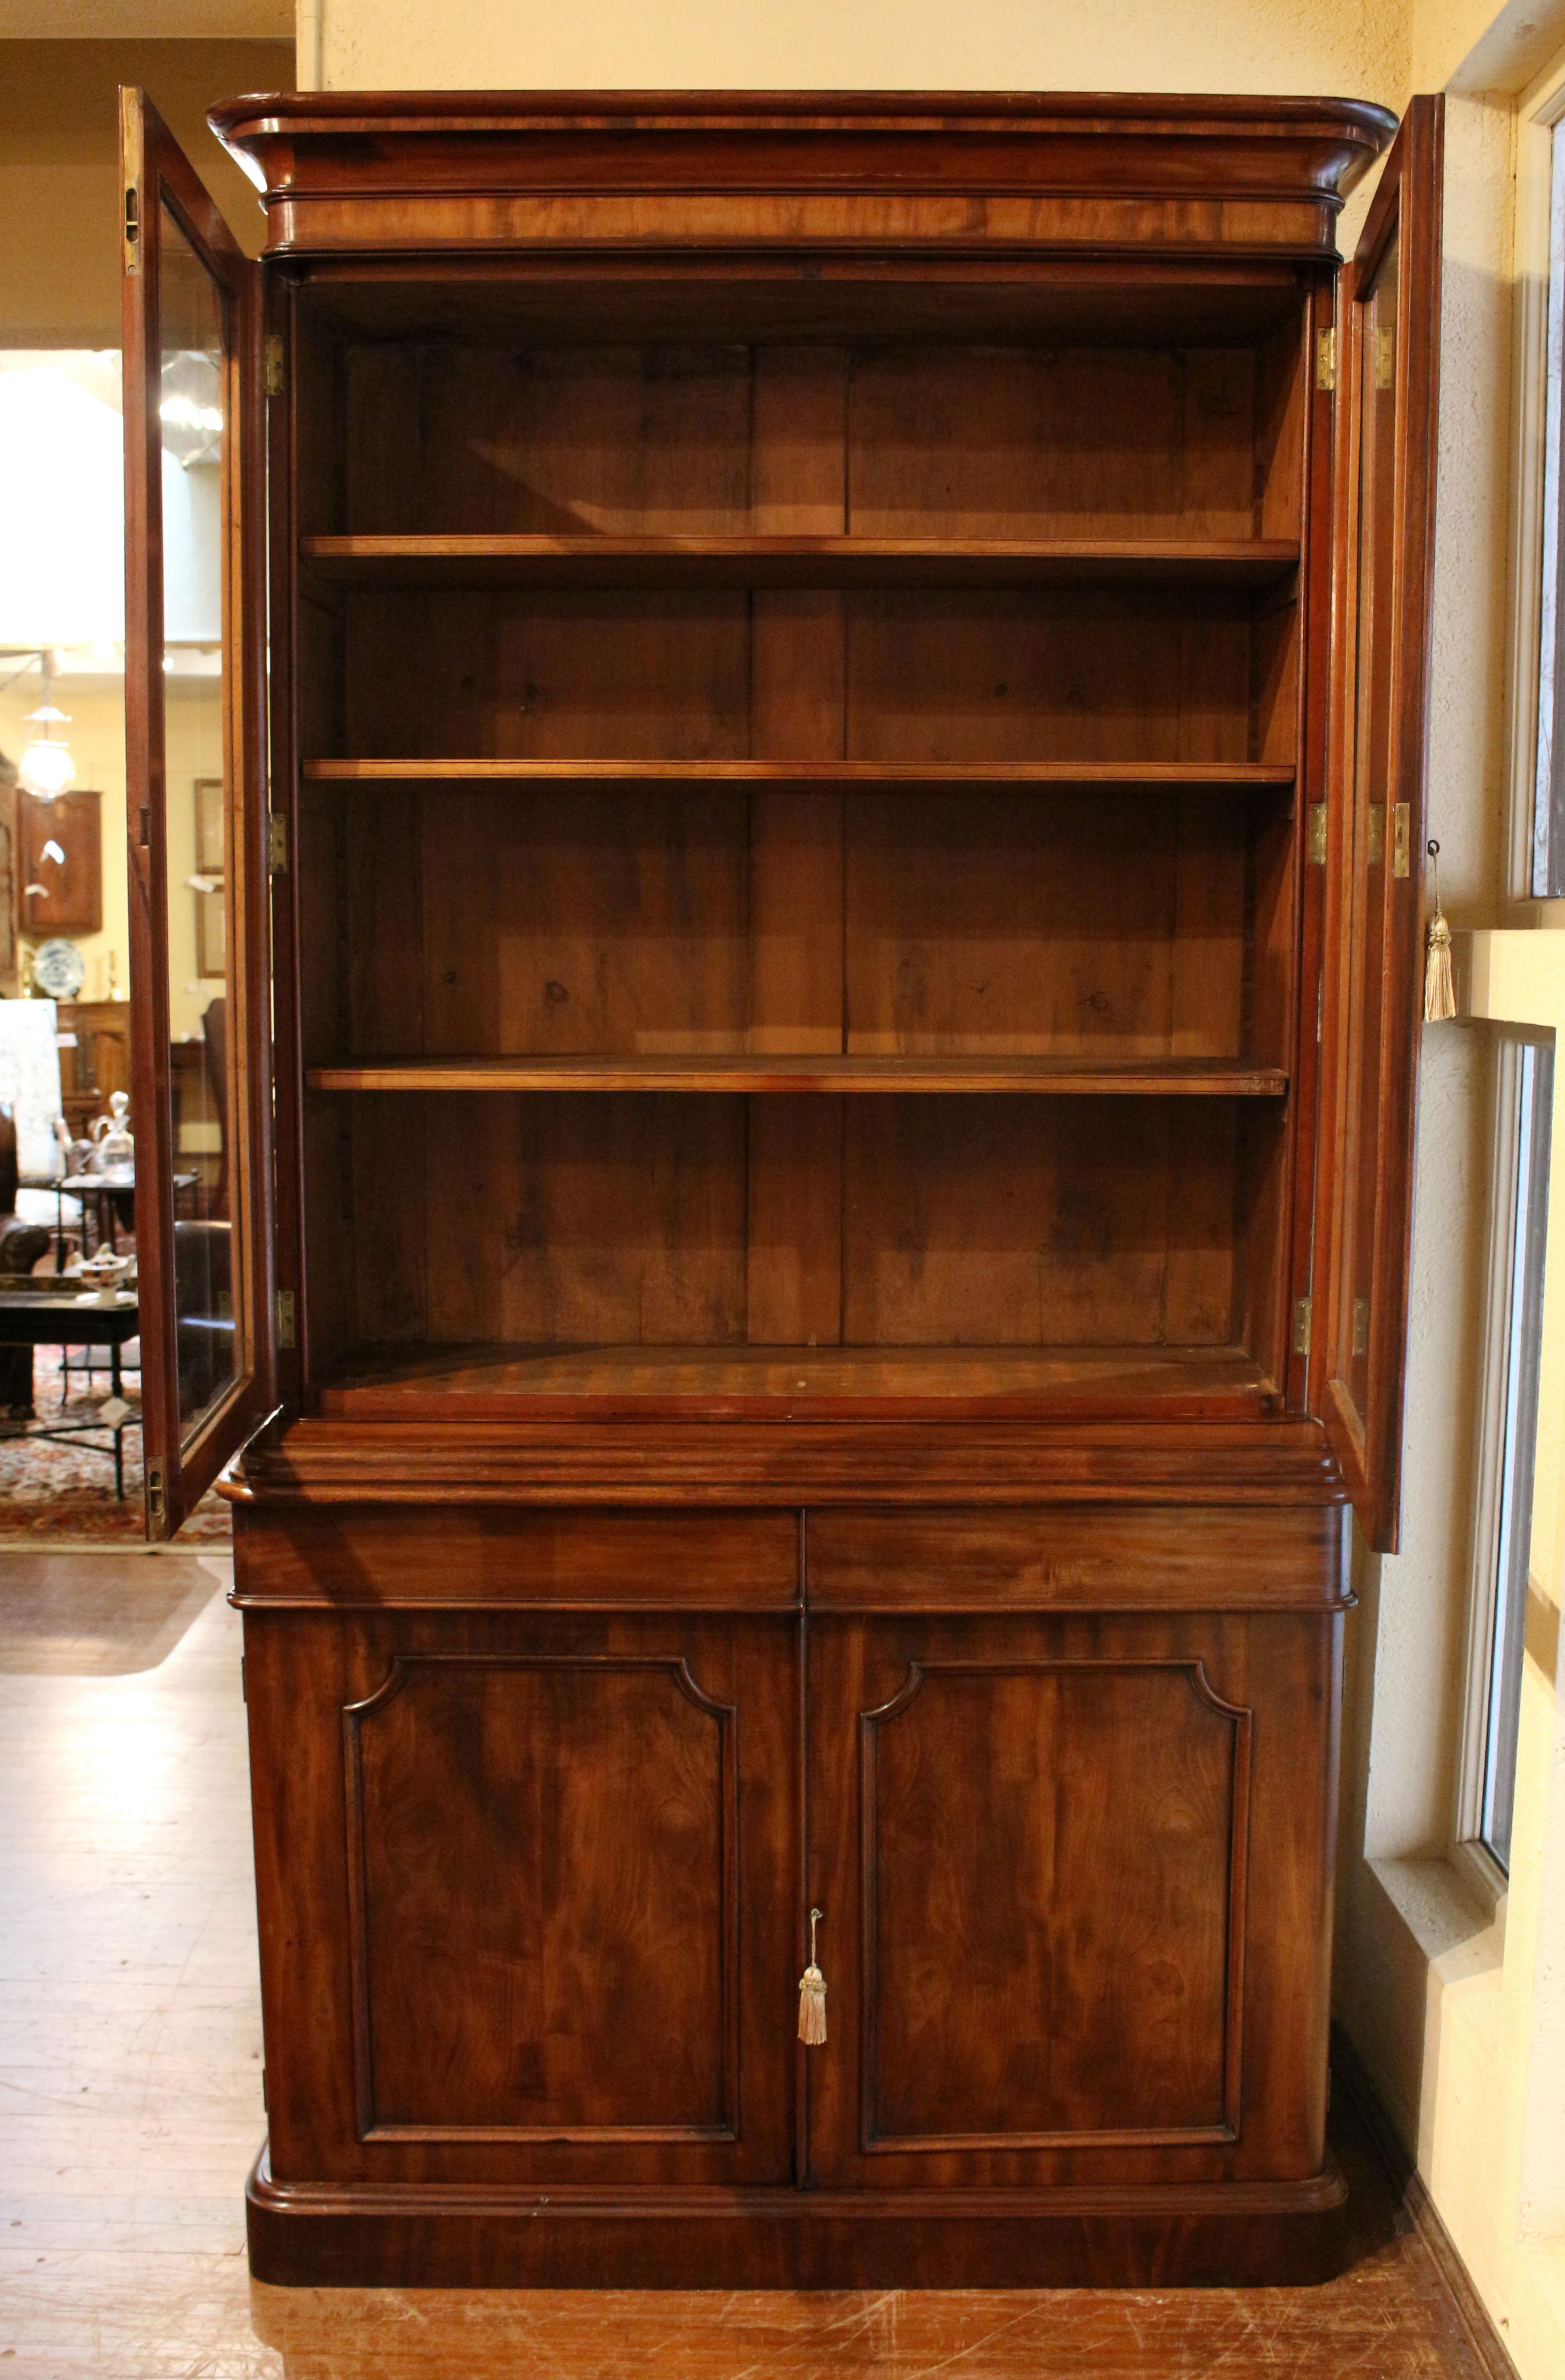 Mid-19th century bookcase cabinet, English. Cavetto corner molded doors - glass for upper section and blind for lower section. Adjustable shelve support bookcase section. Bold, ovolo molded crown. Bold ogee molded waist over 2 short drawers over